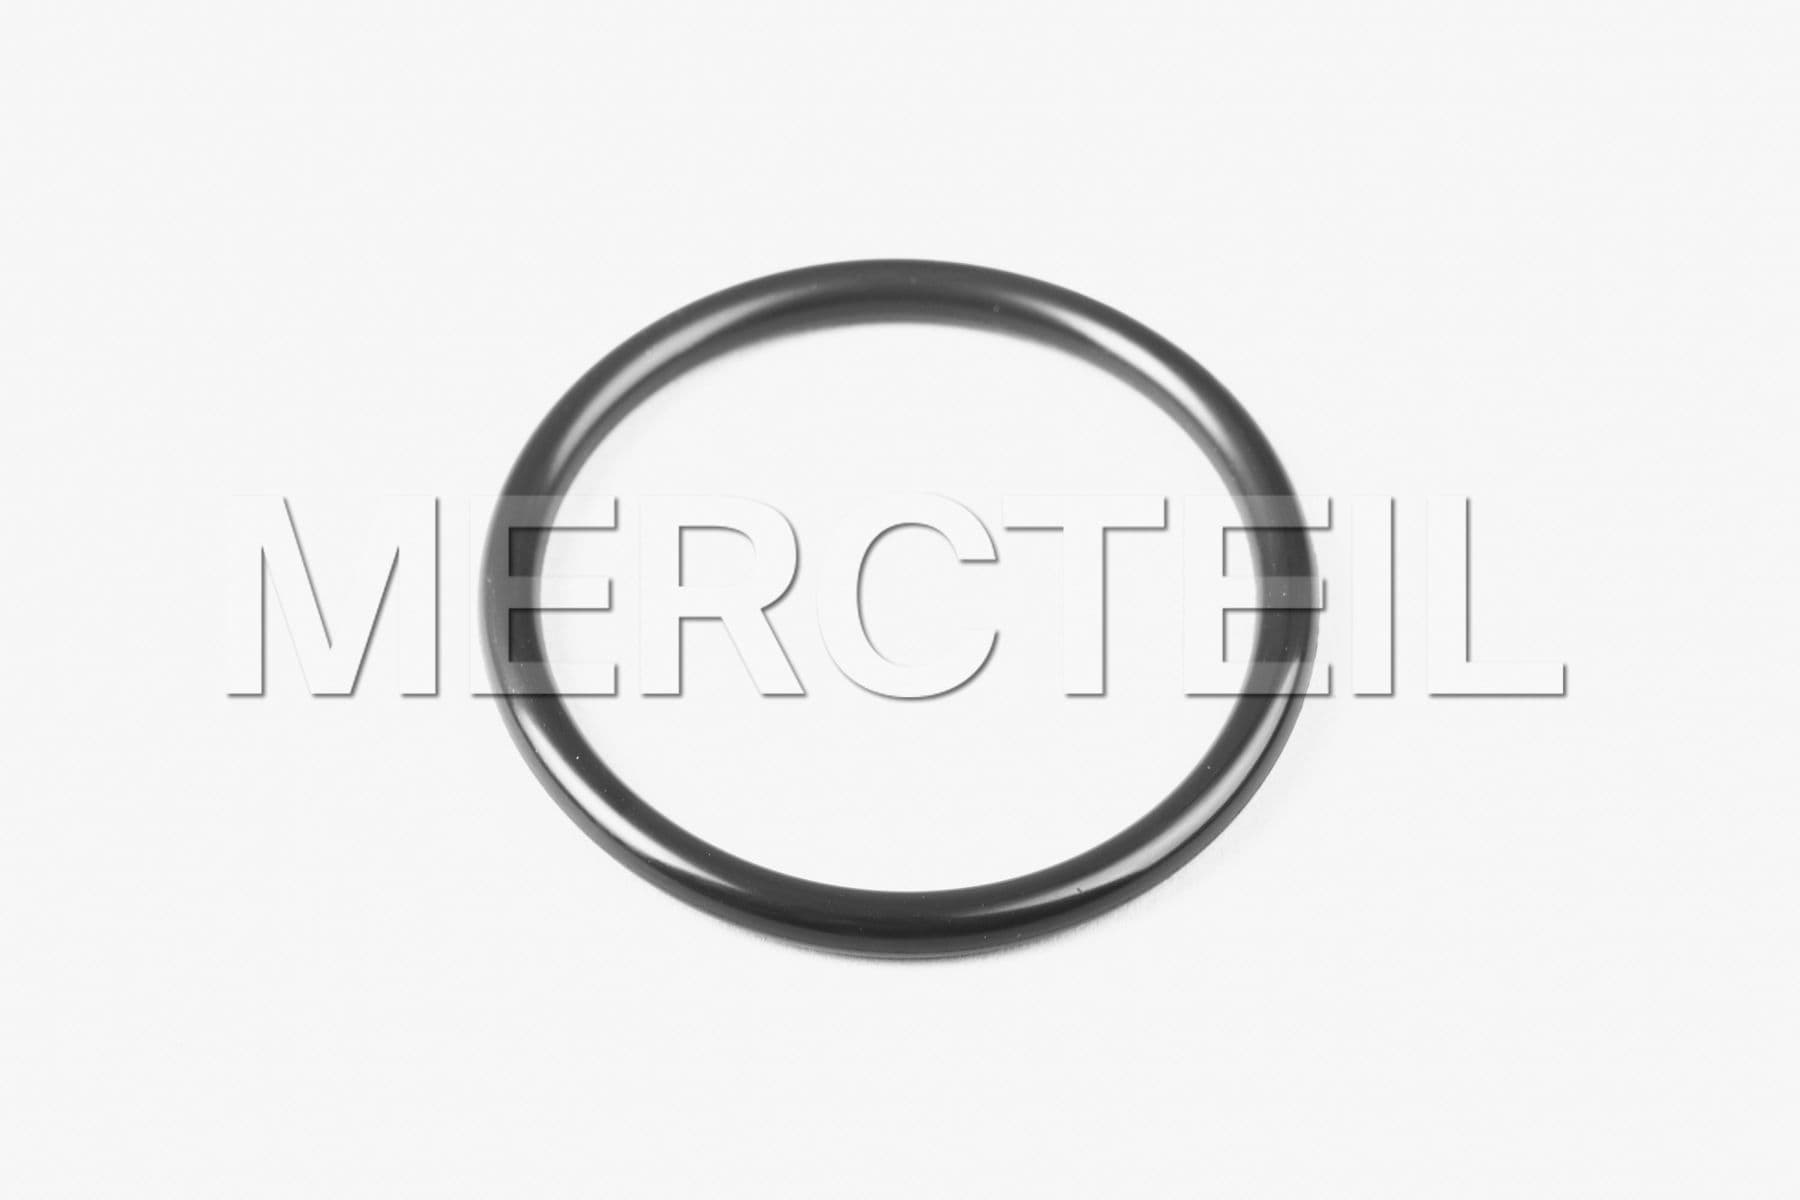 Buy the spare part Mercedes-Benz A0279971648 seal ring